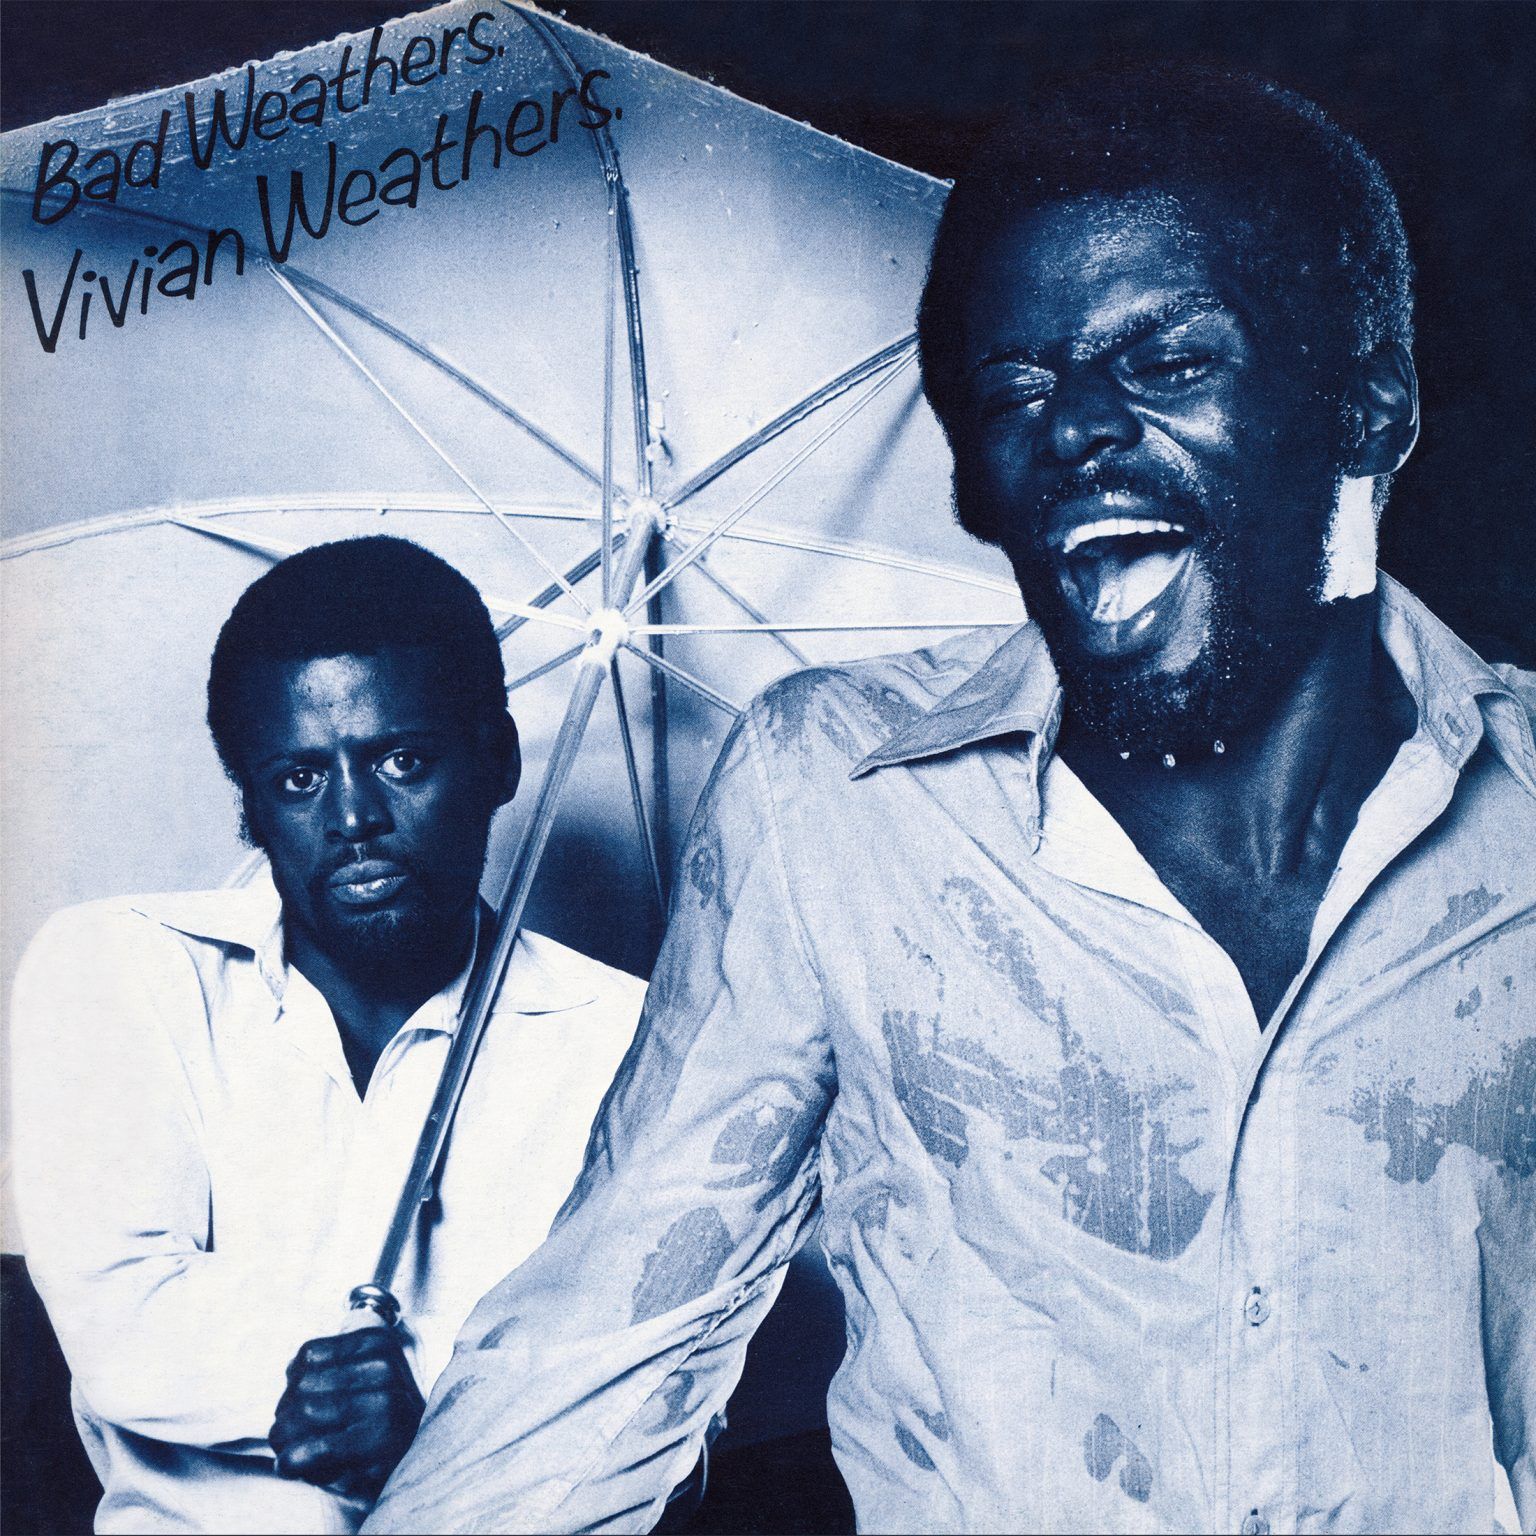 Vivian Weathers Bad Weathers LP cover